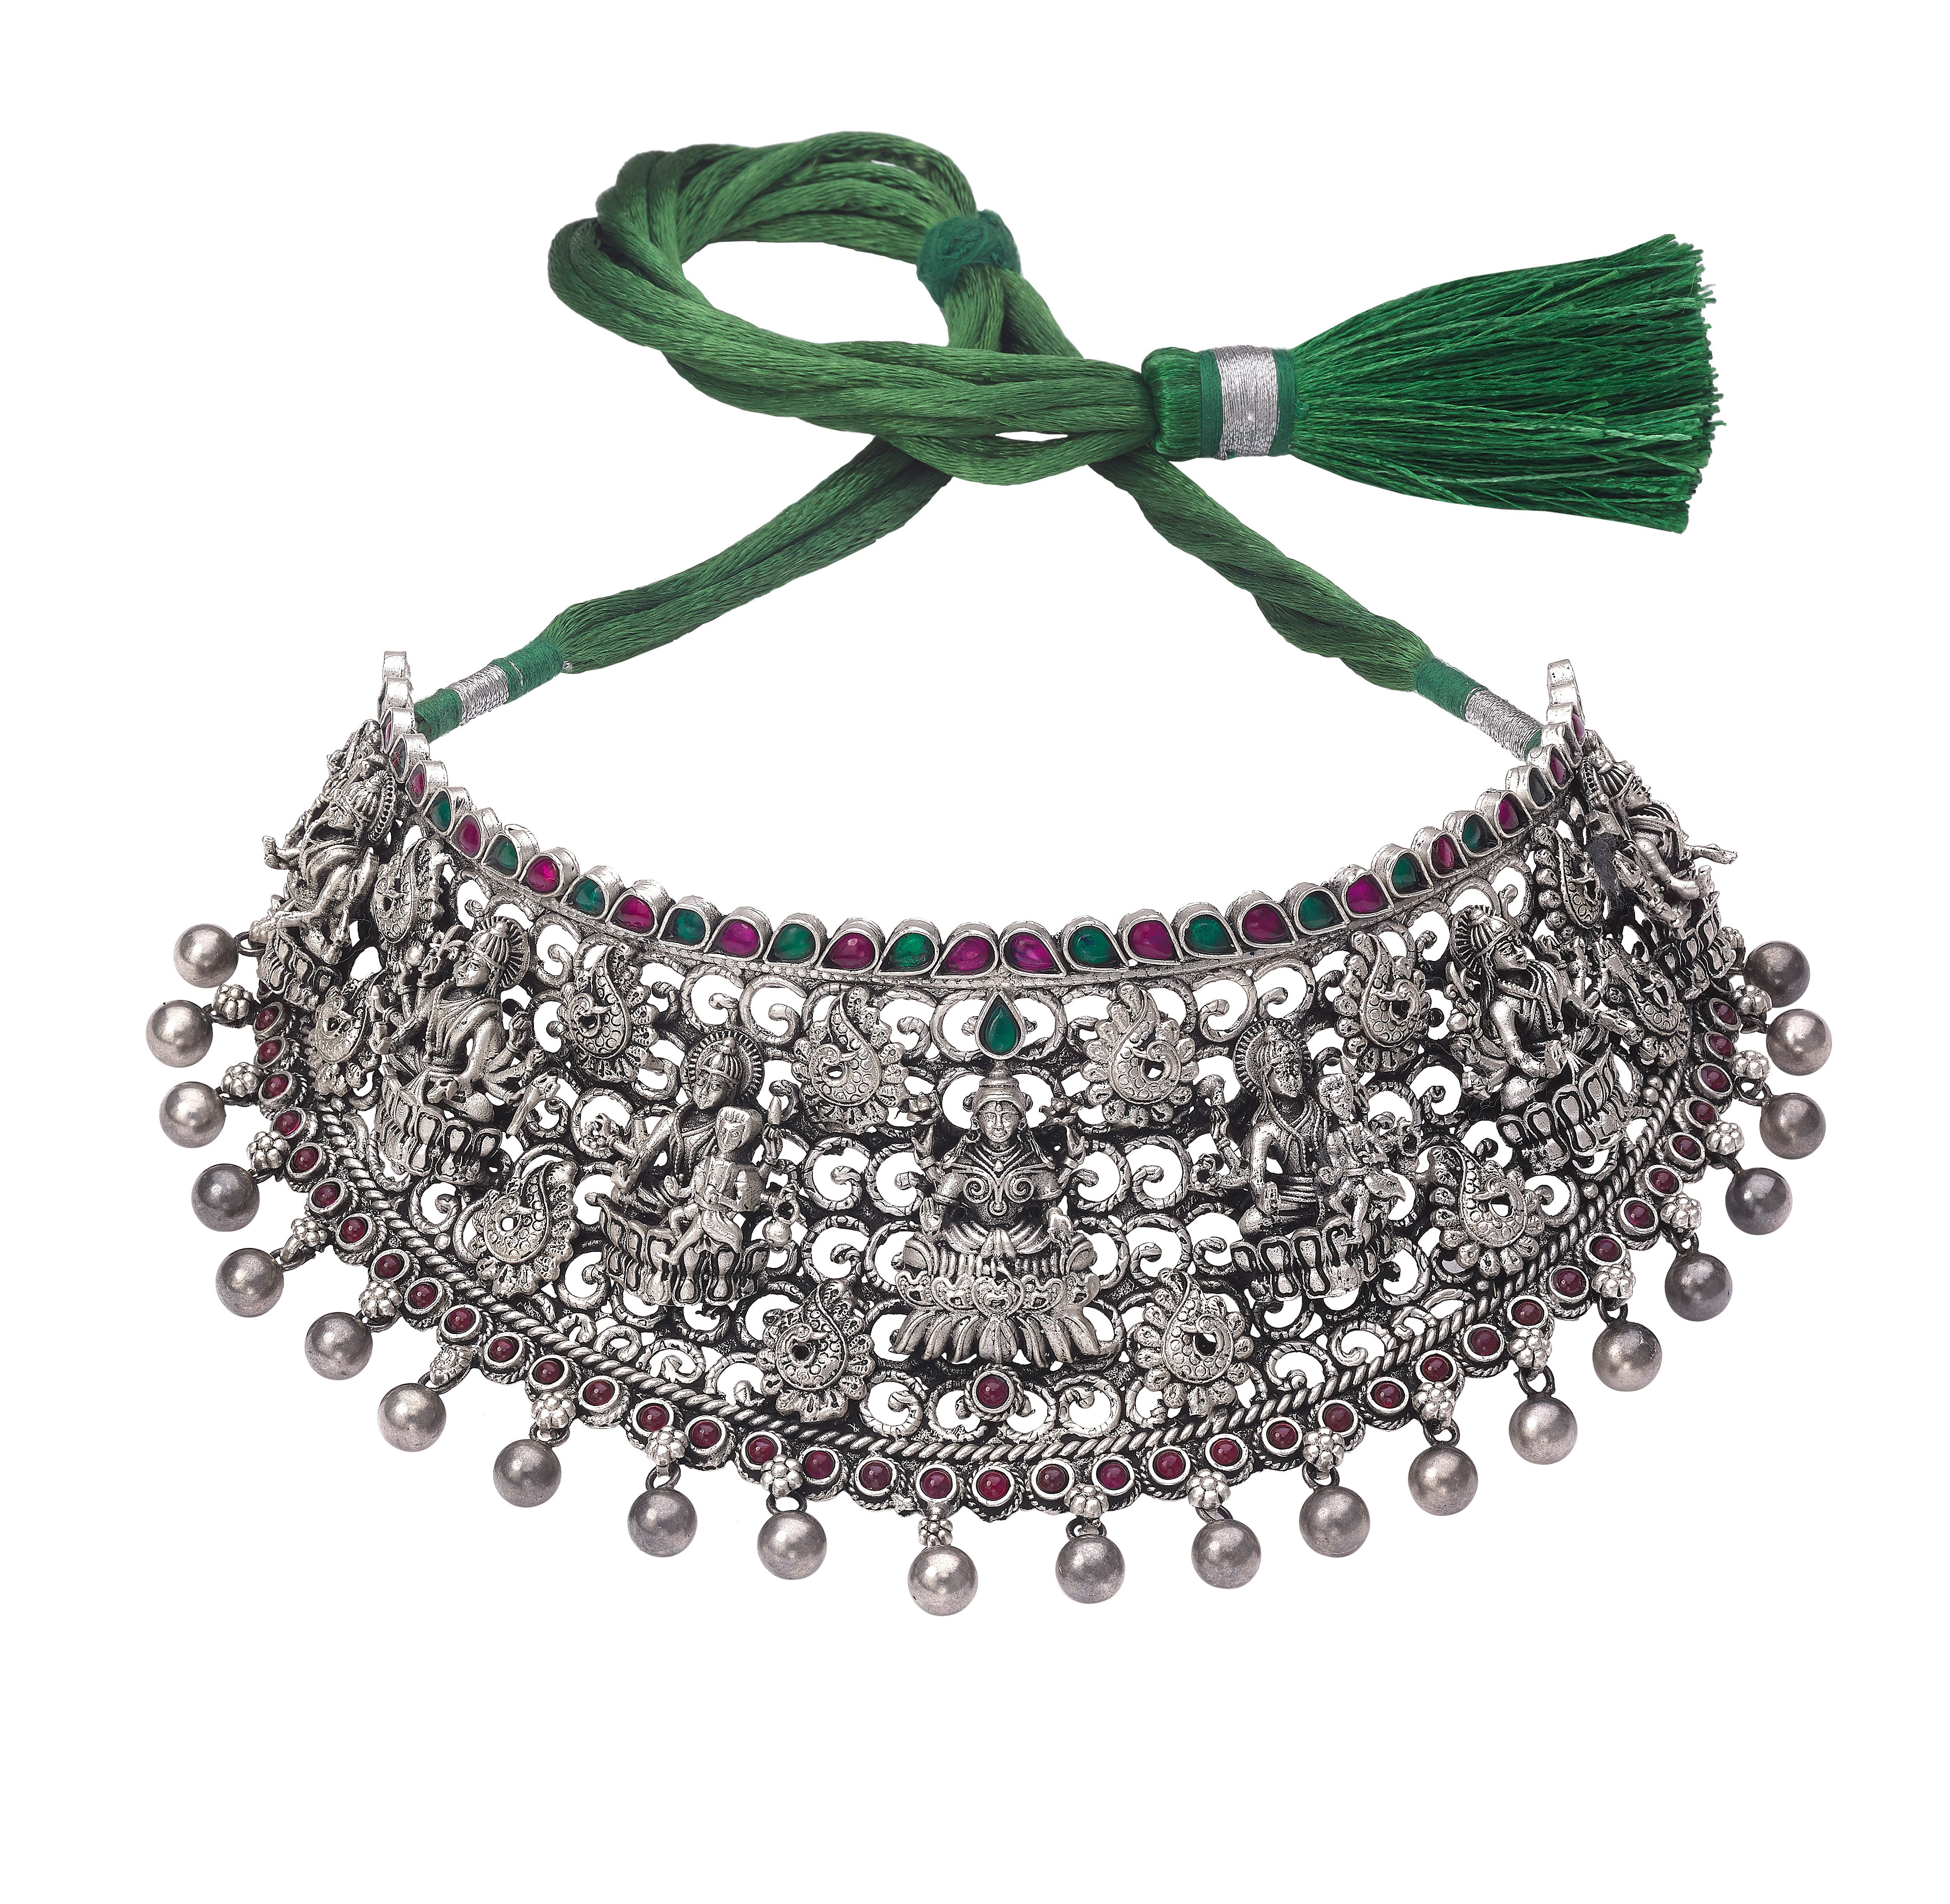 Silver Handcrafted Necklace with Green Stones